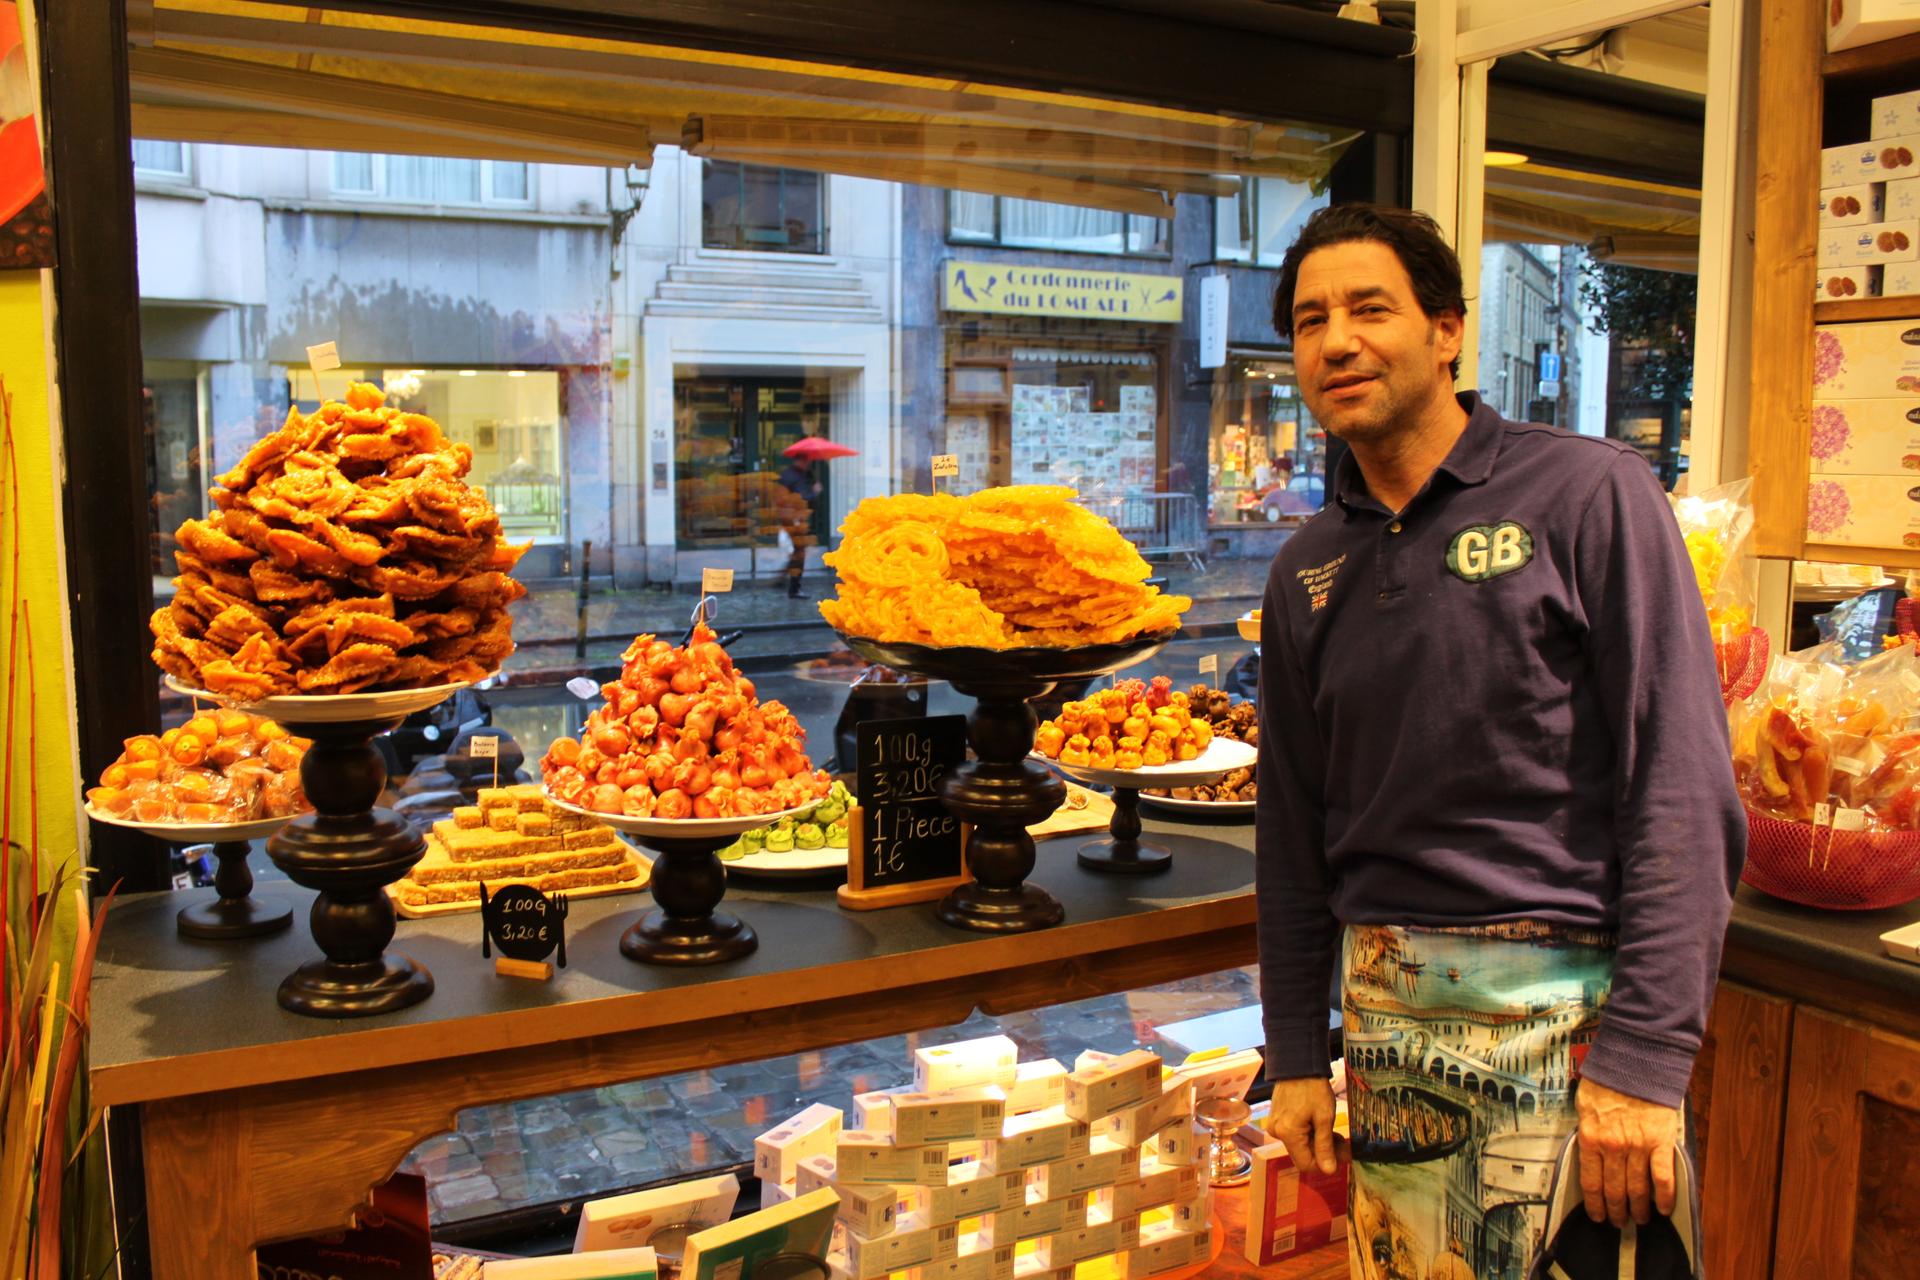 Imad Karkotli in his shop in Brussels